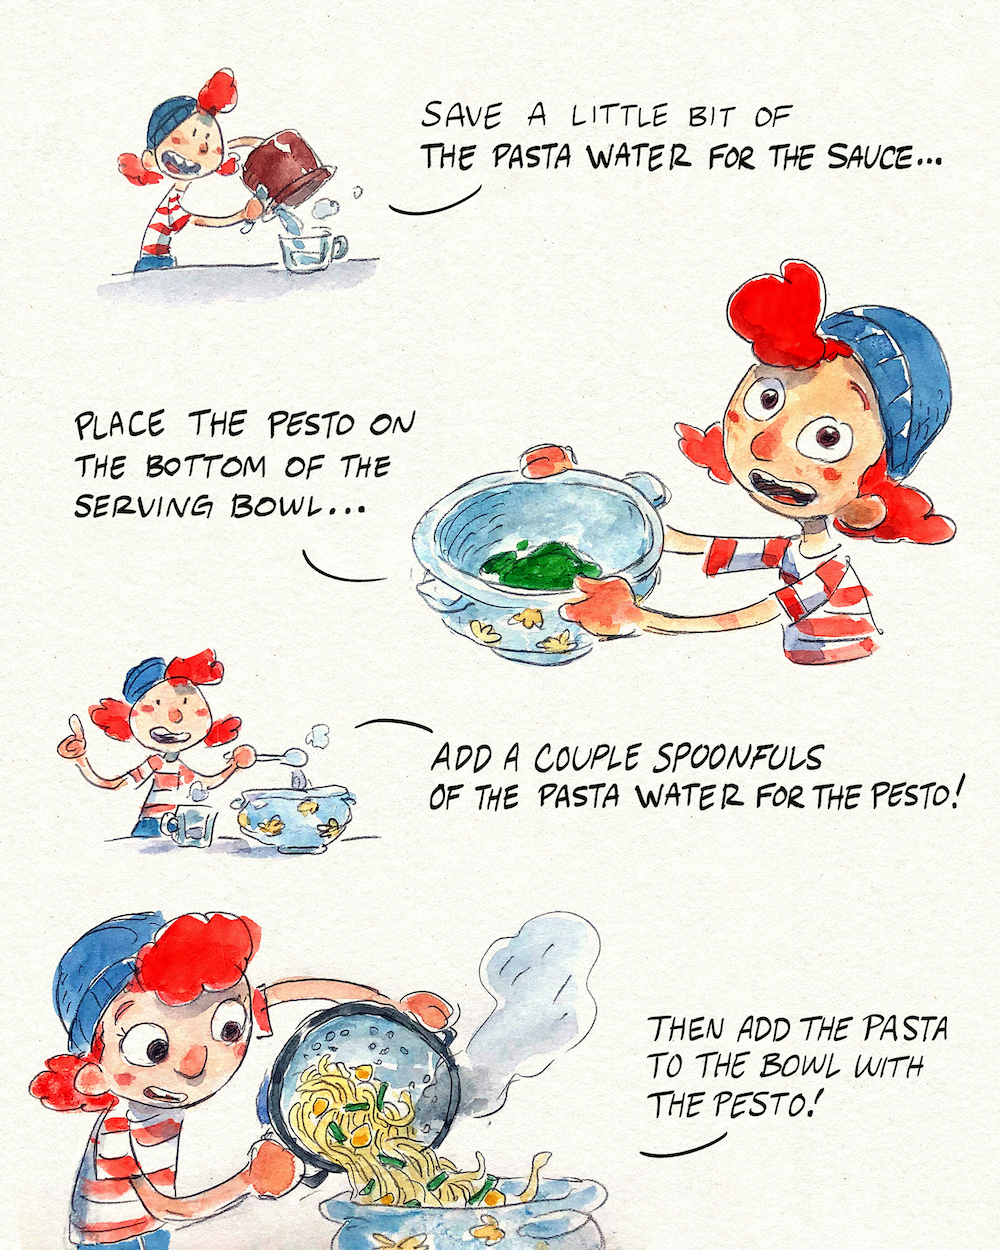 illustration: place pesto and spoonfuls of pasta water in bottom of serving bowl, then add pasta and mix